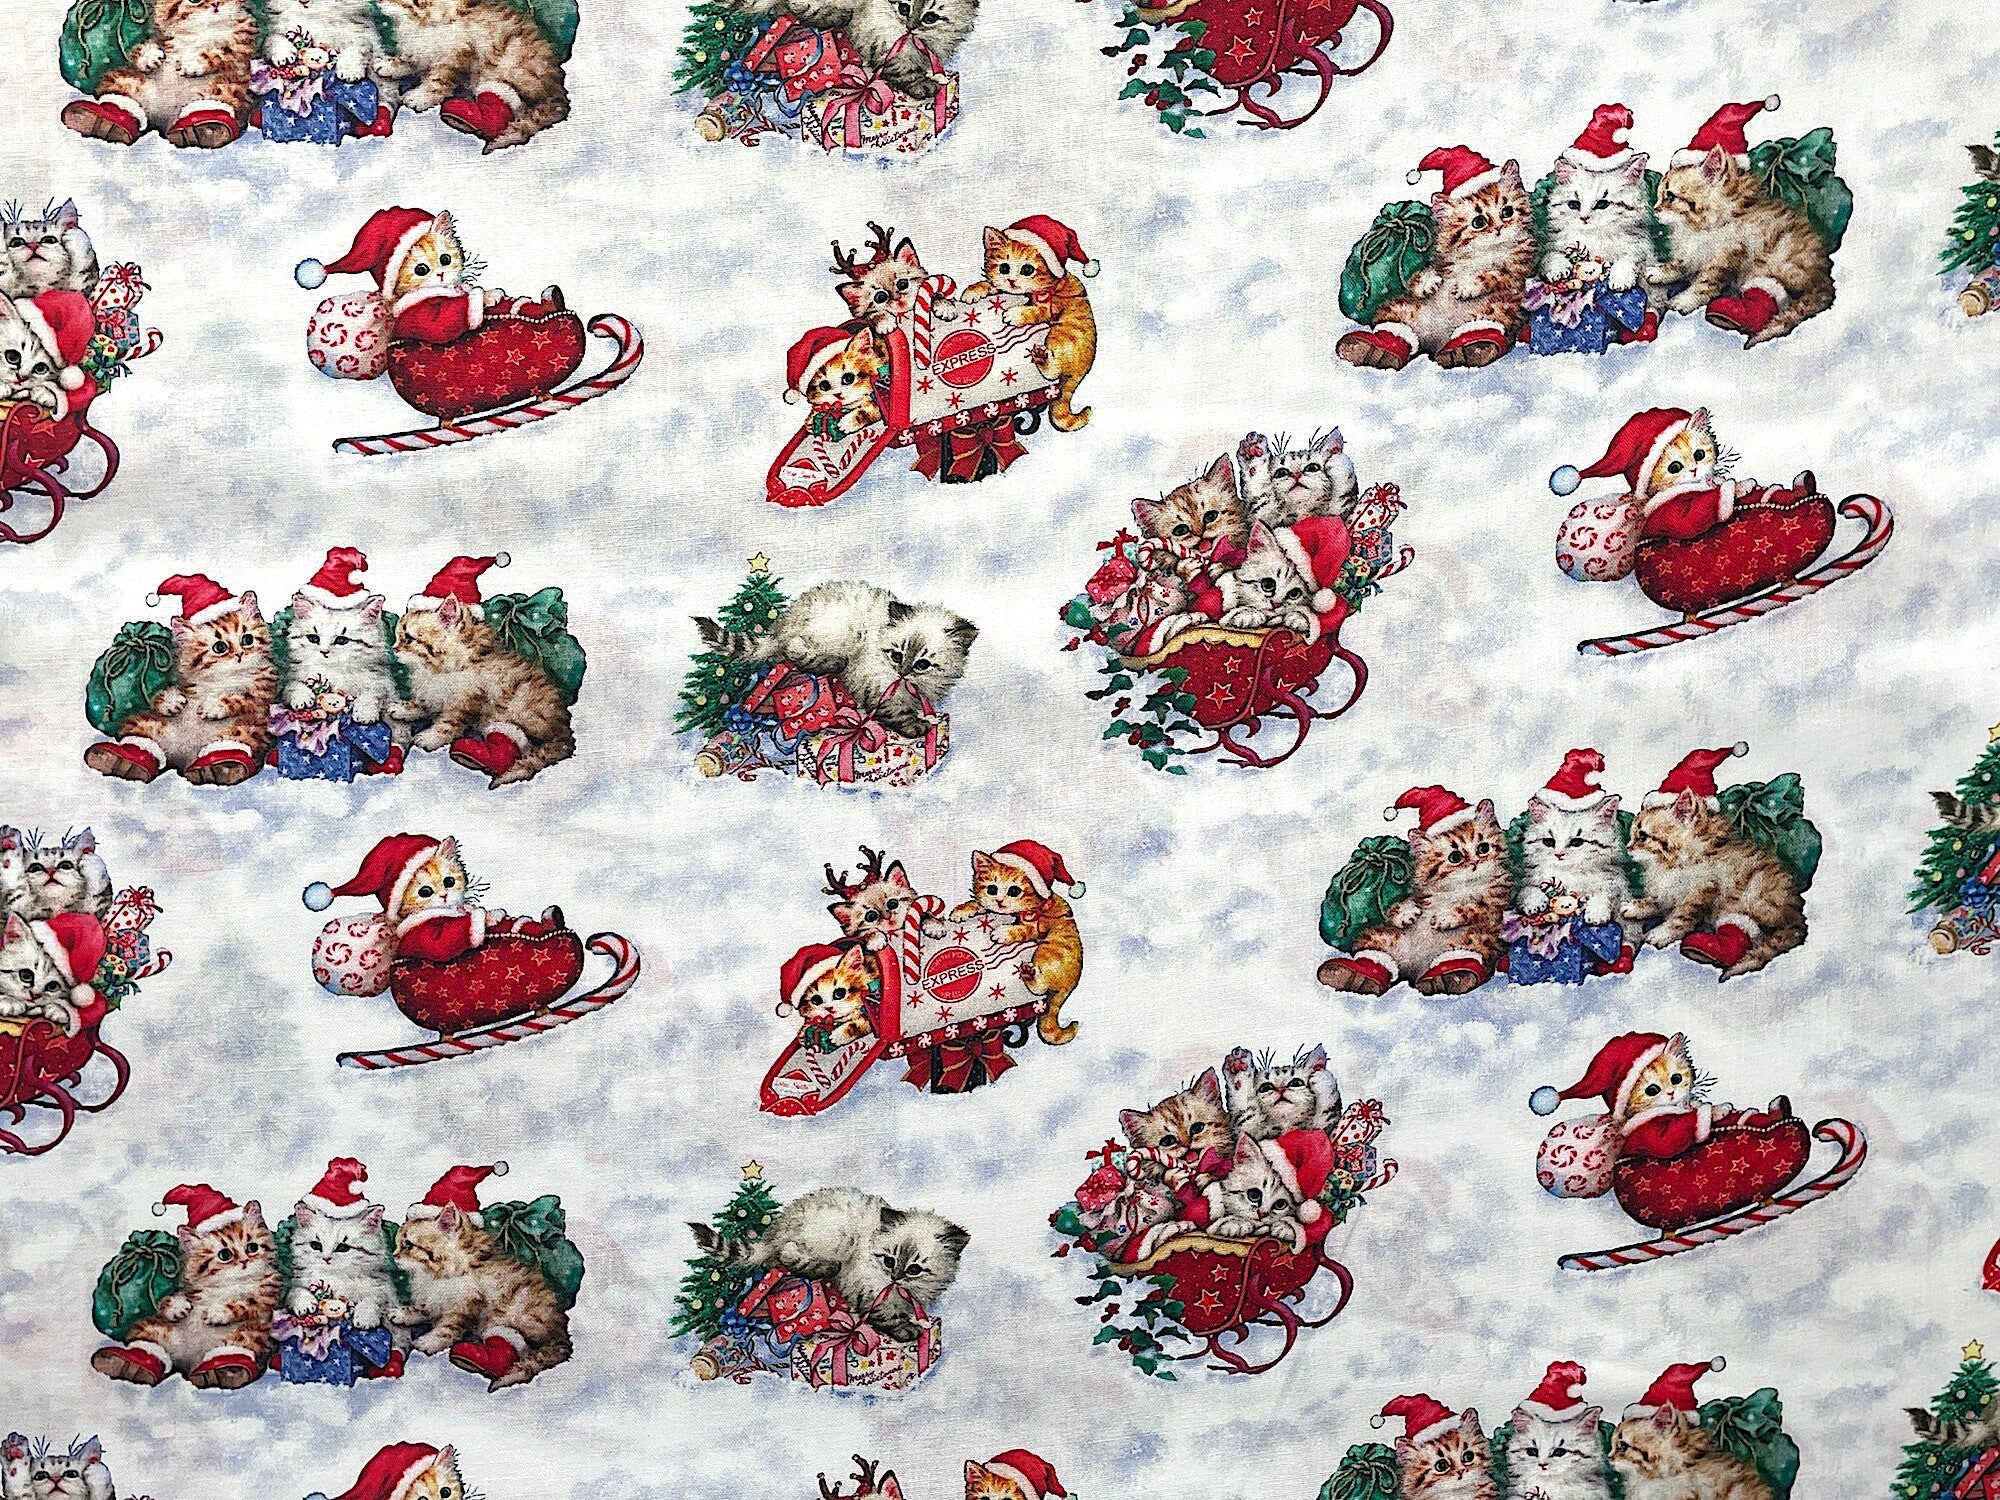 This design has sweet little kittens in Christmas Sleighs, in a mailbox, and on a mound of presents.